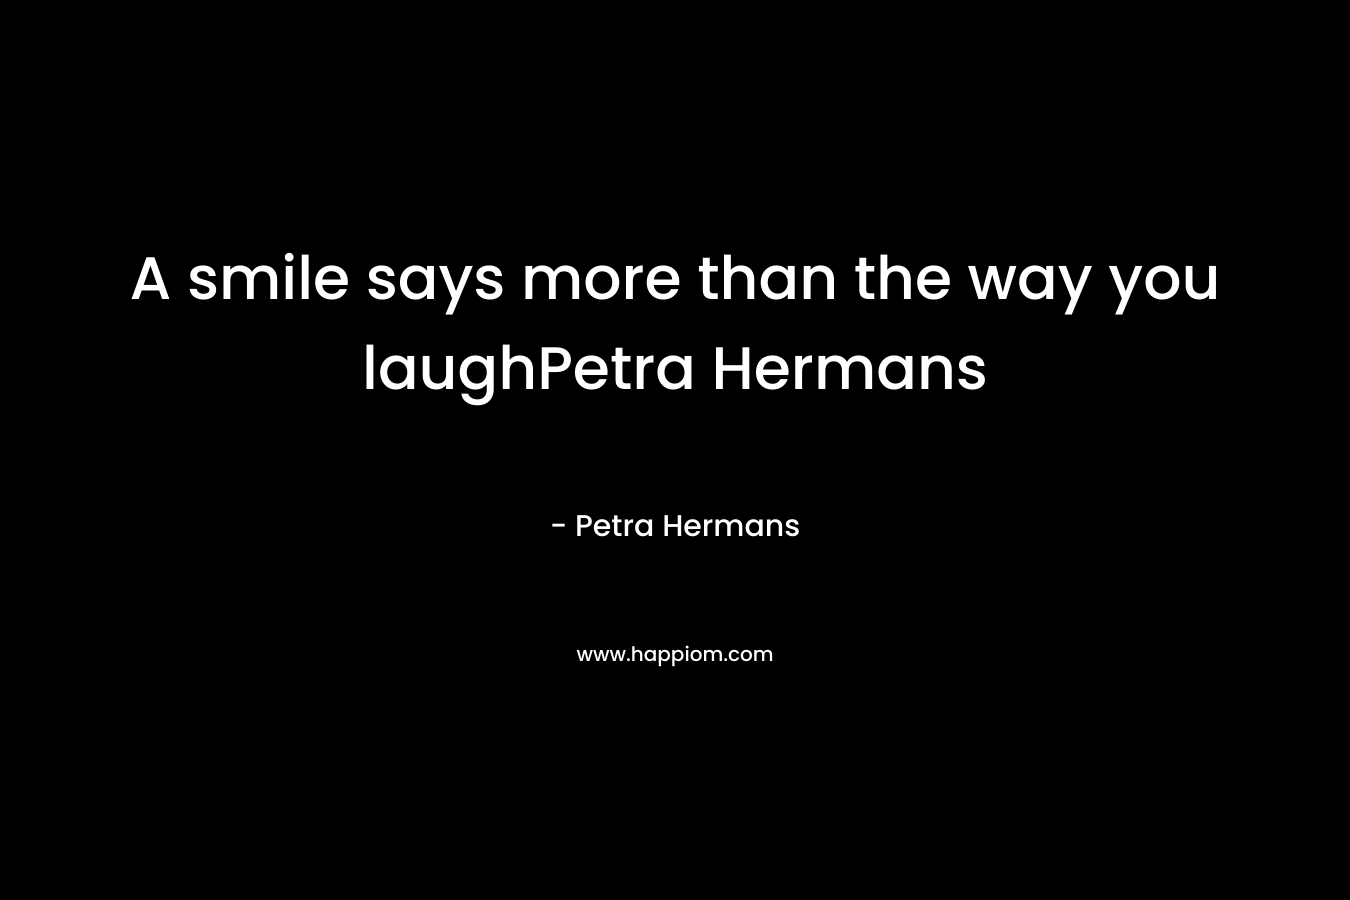 A smile says more than the way you laughPetra Hermans – Petra Hermans